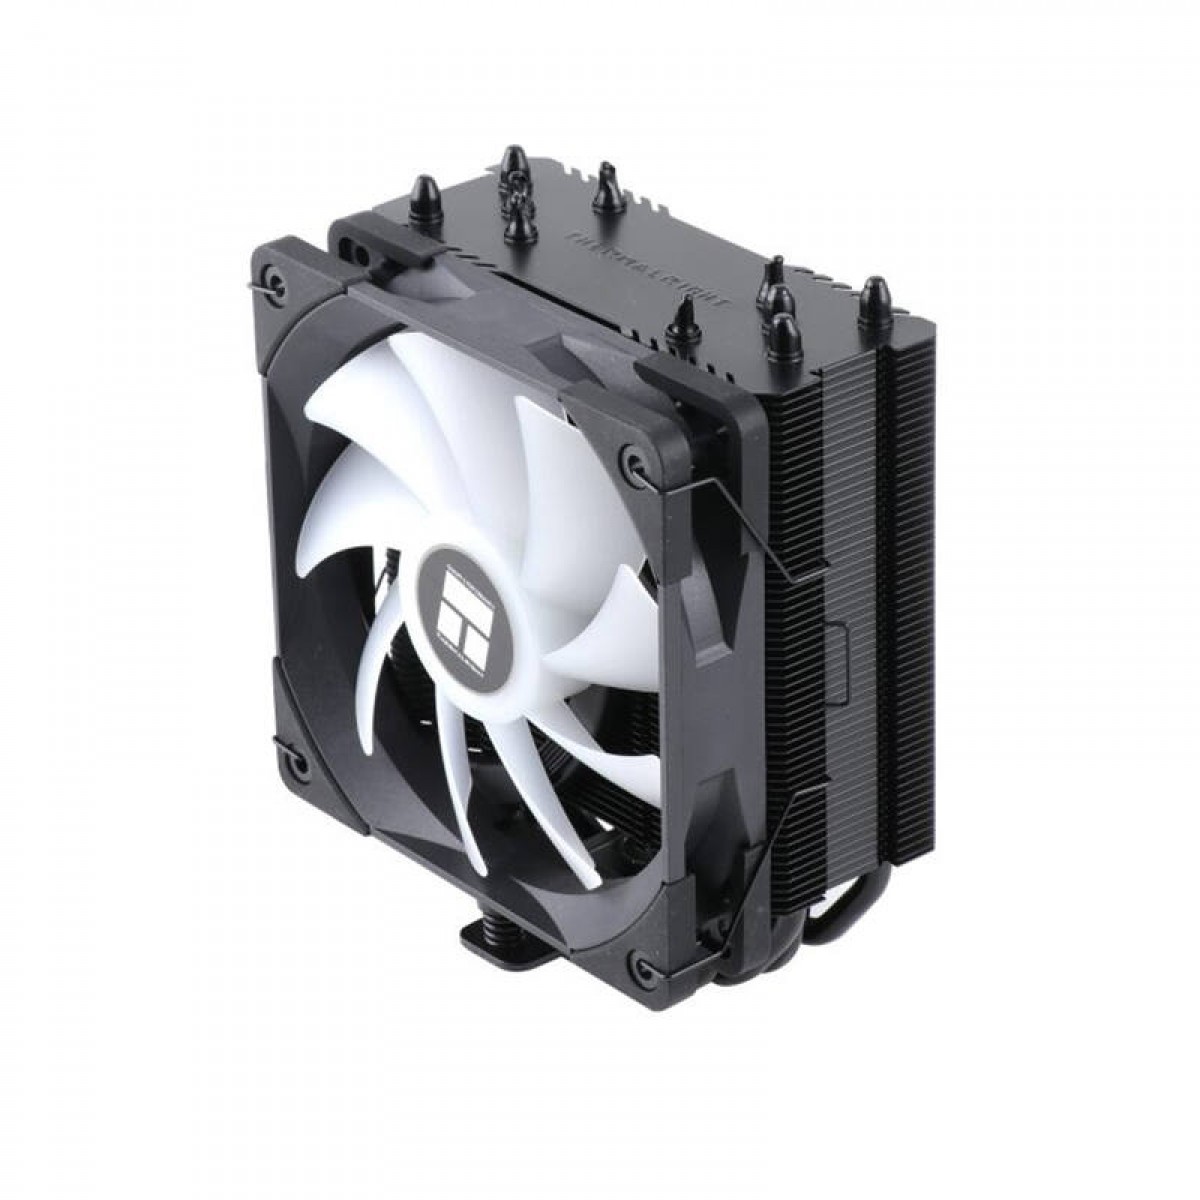 Thermalright Assassin King 120 SE ARGB - CPU Air Cooler